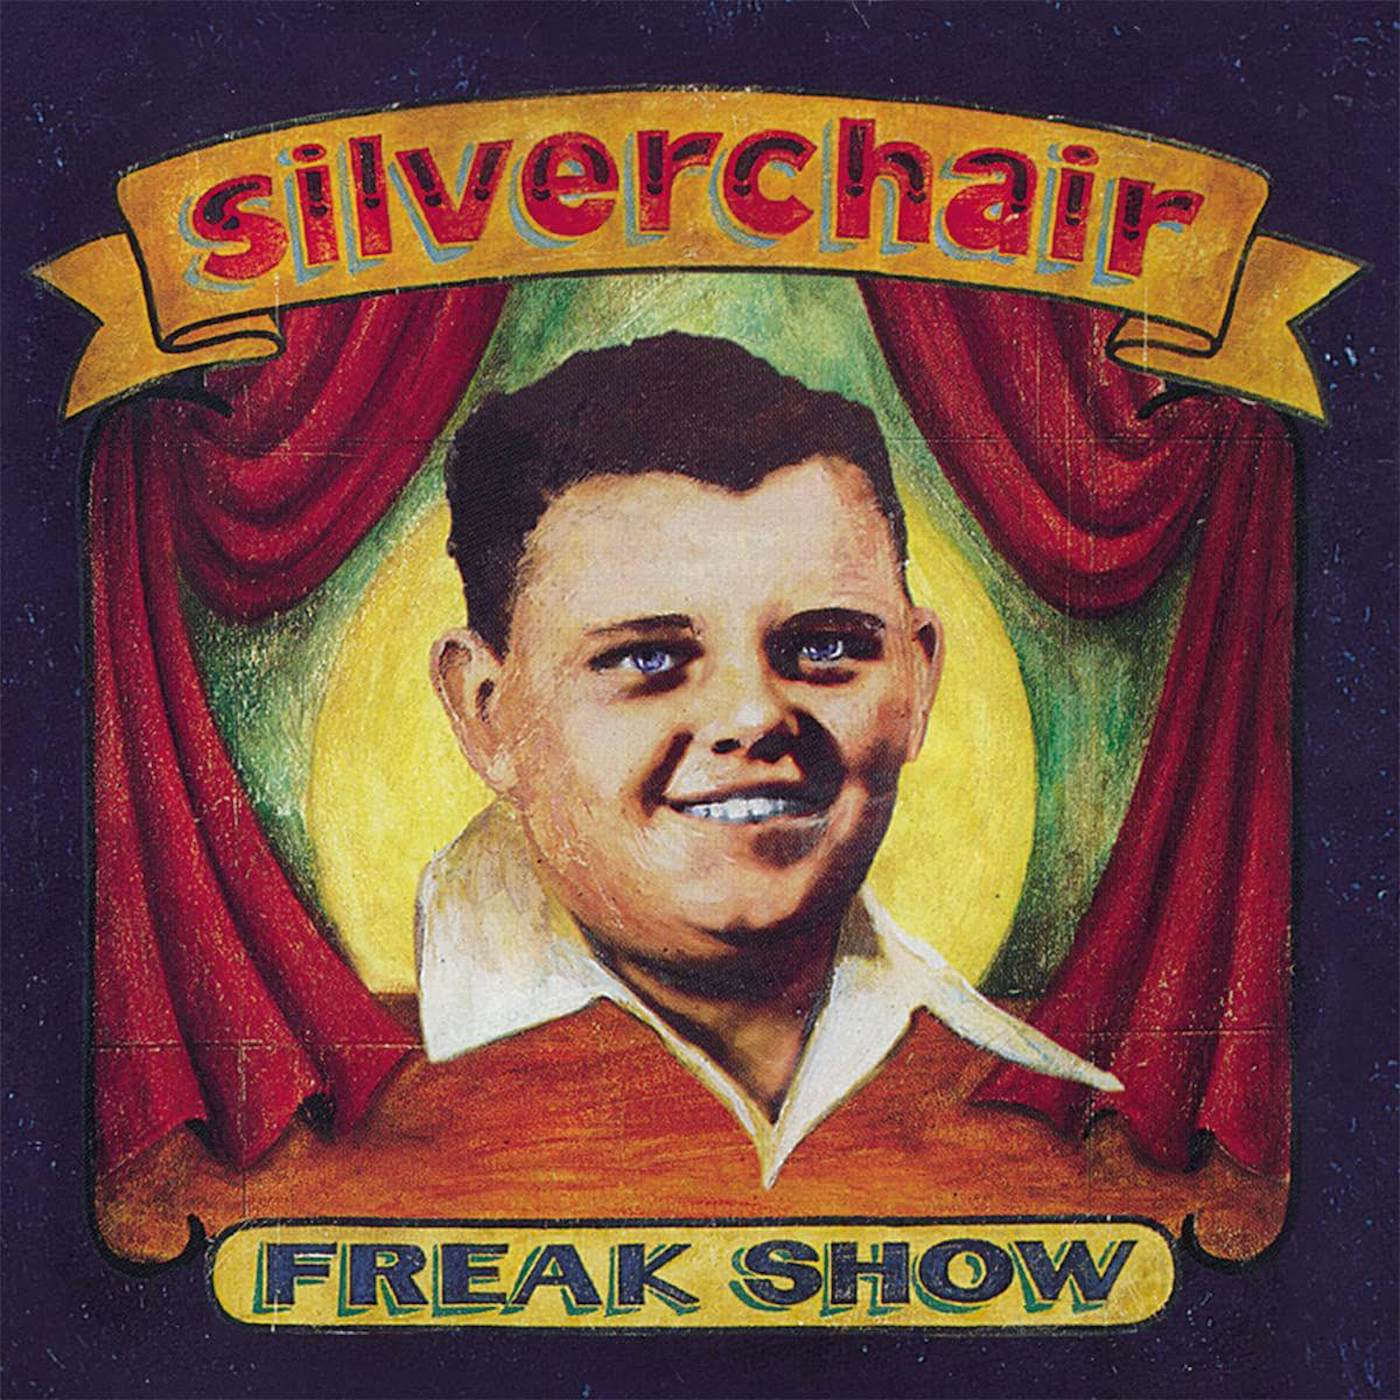 Silverchair Freak Show (Limited Yellow & Blue Marbled) Vinyl Record